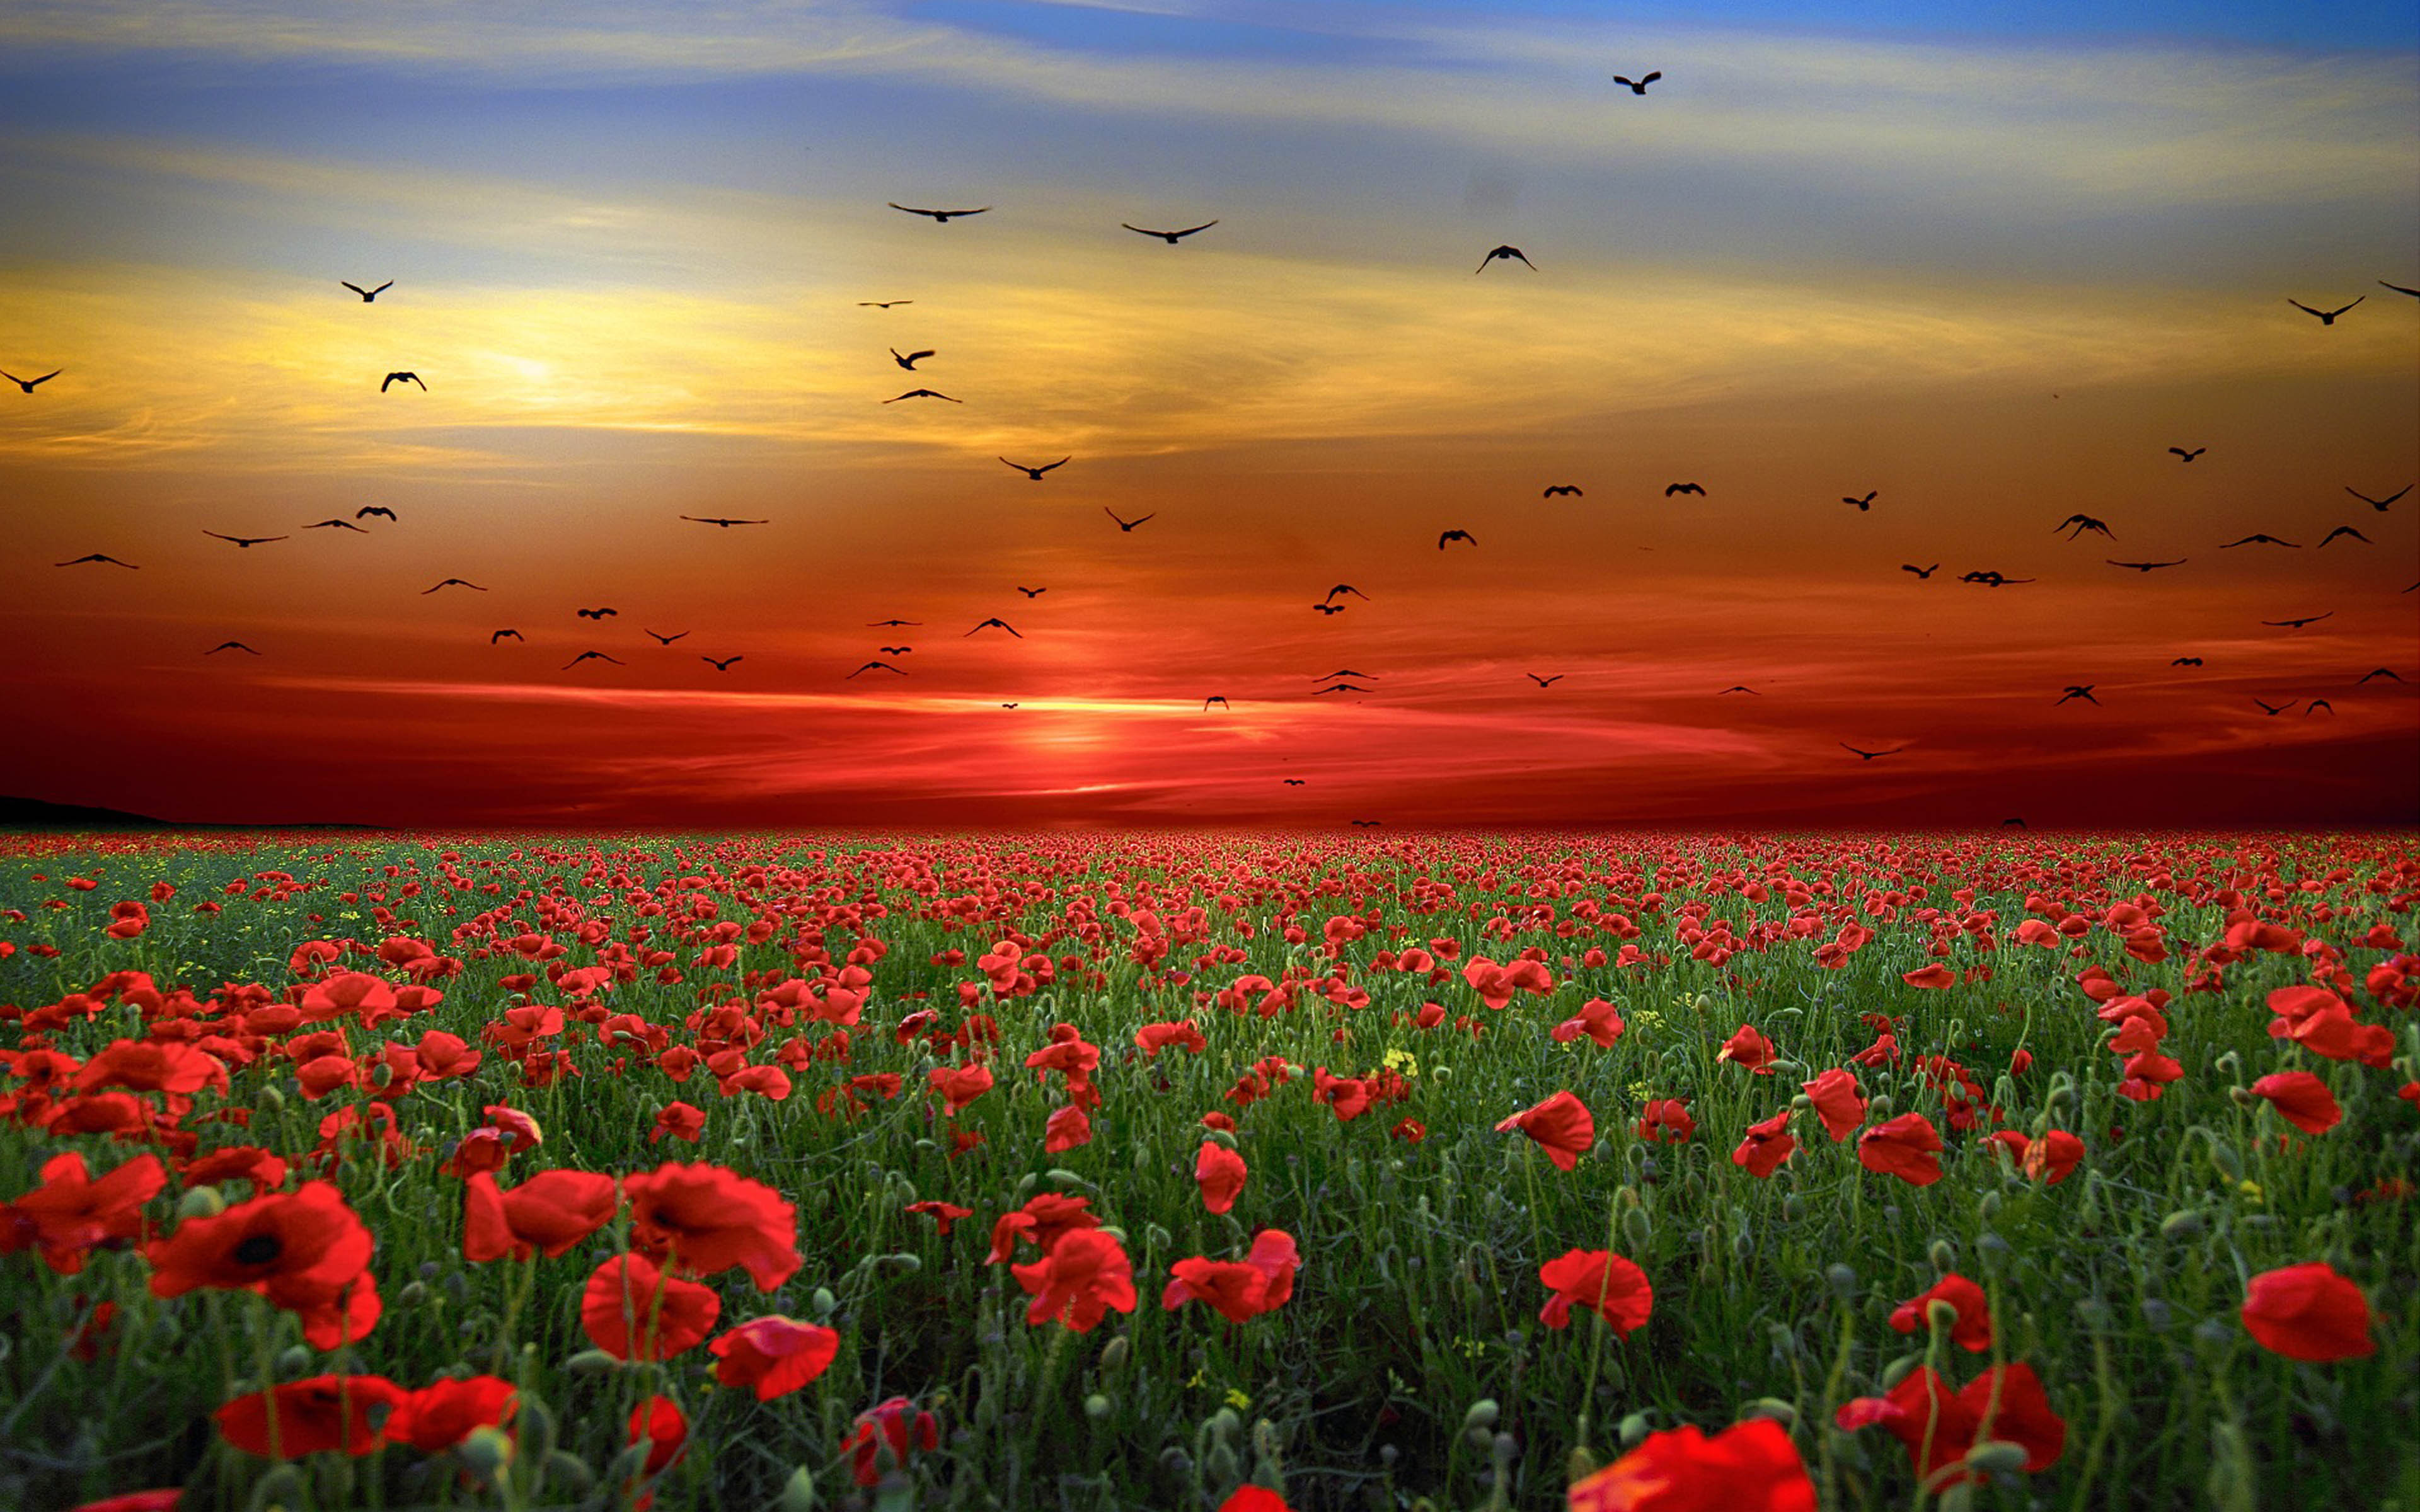 sunset sky red clouds birds field  poppies red flowers landscape